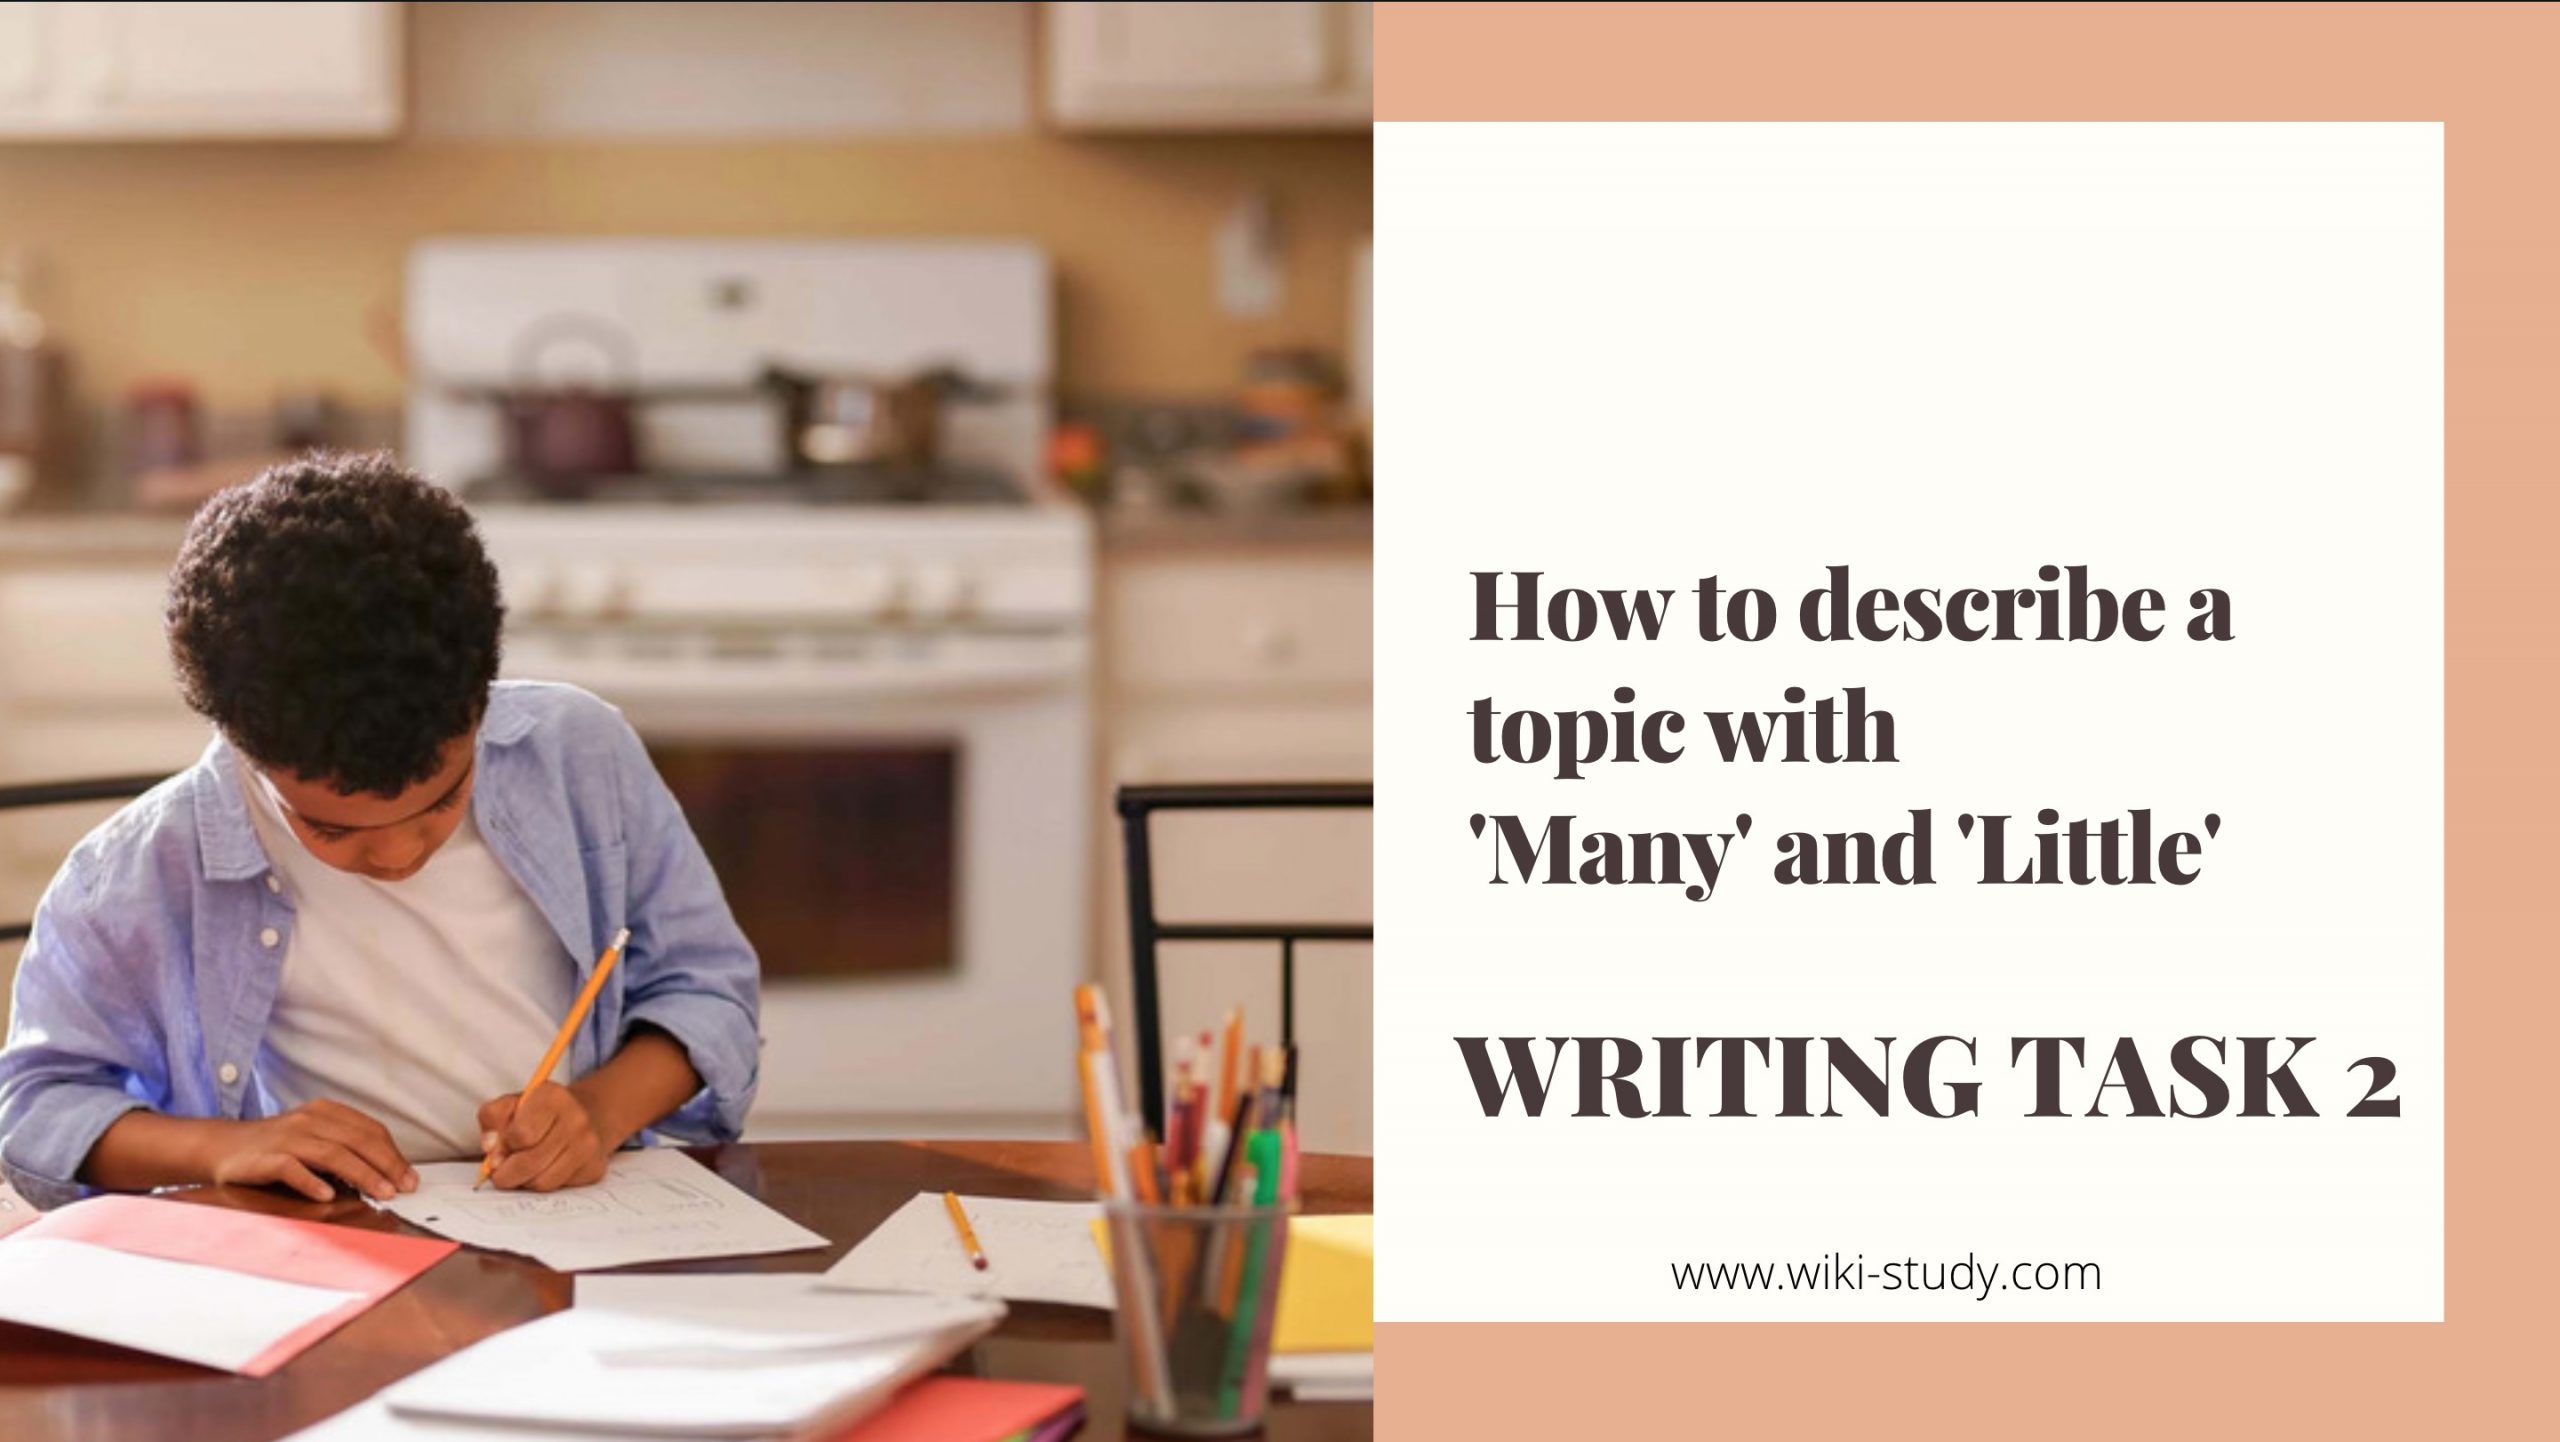 Writing task 2 - How to describe a topic with 'Many' and 'Little'